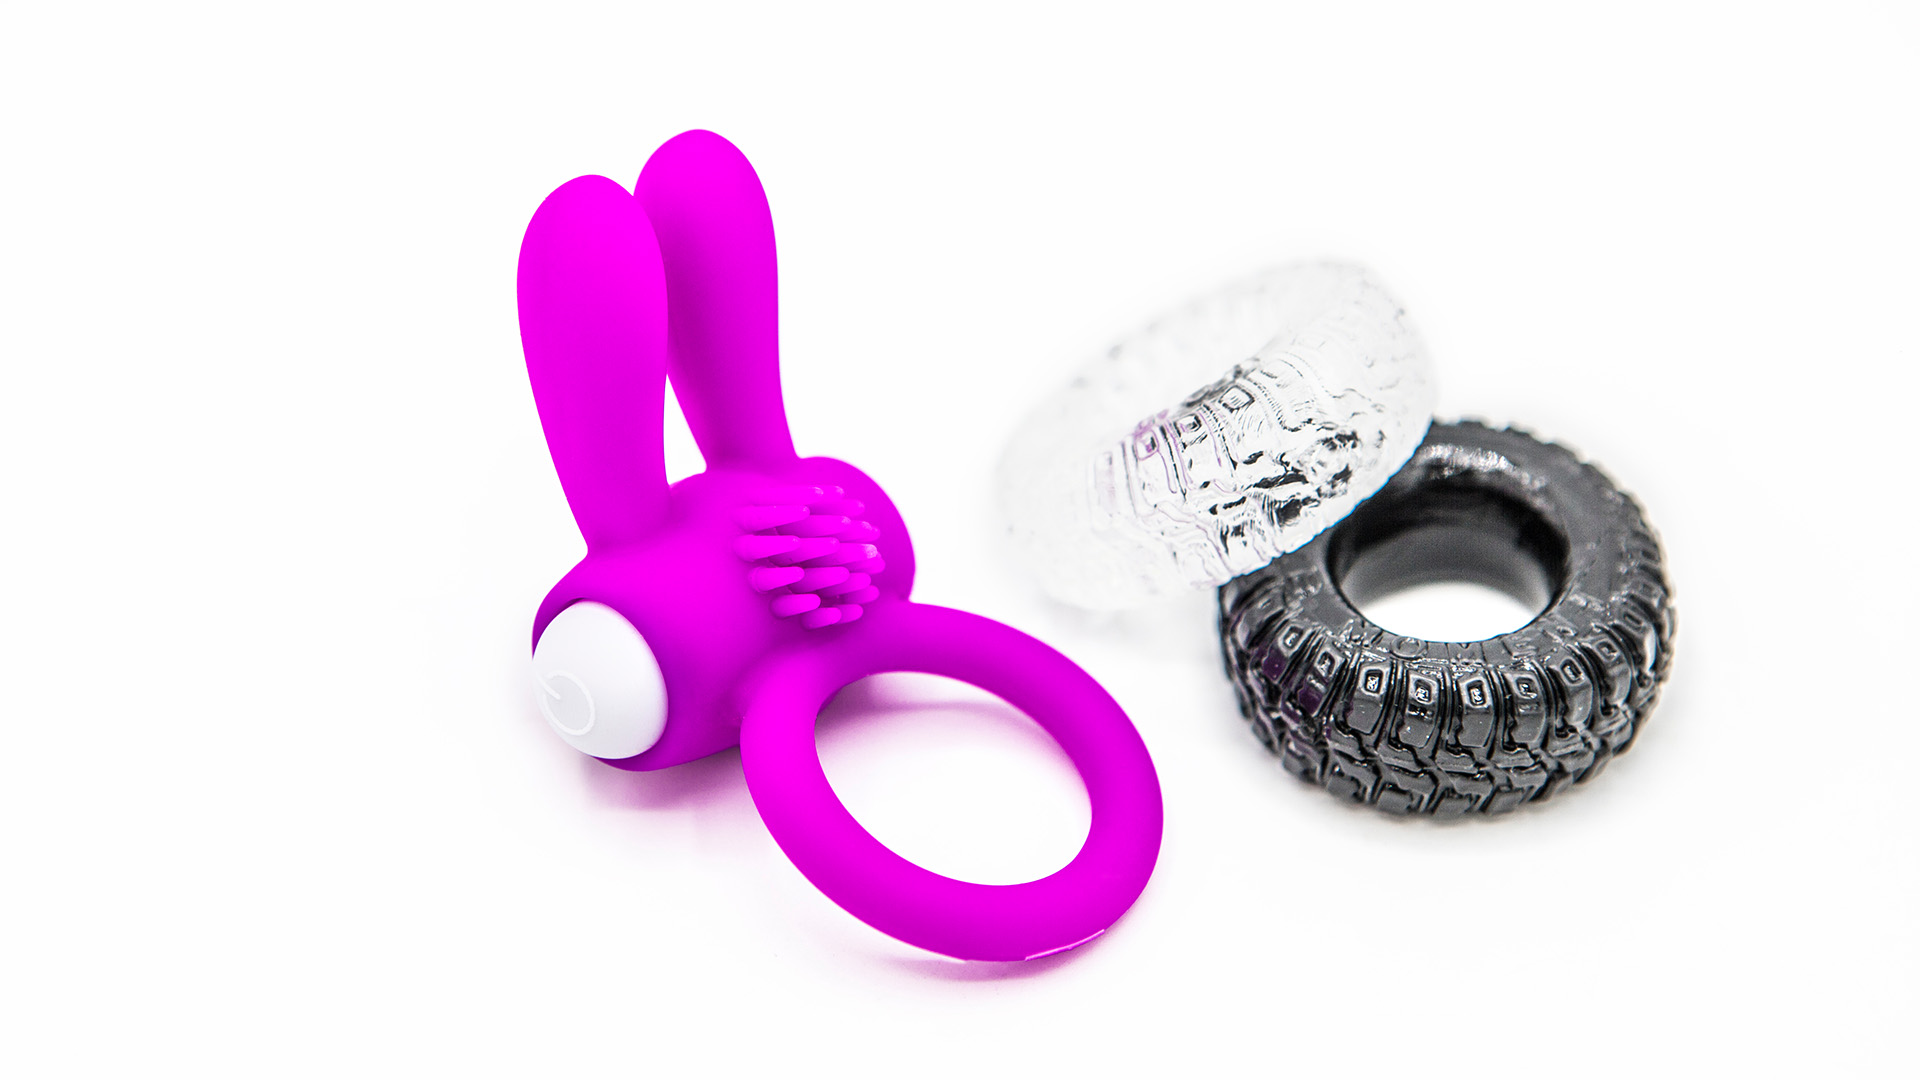 Pink cock ring with bunny ears next to two other cock rings with wheel designs in black and white. White background.